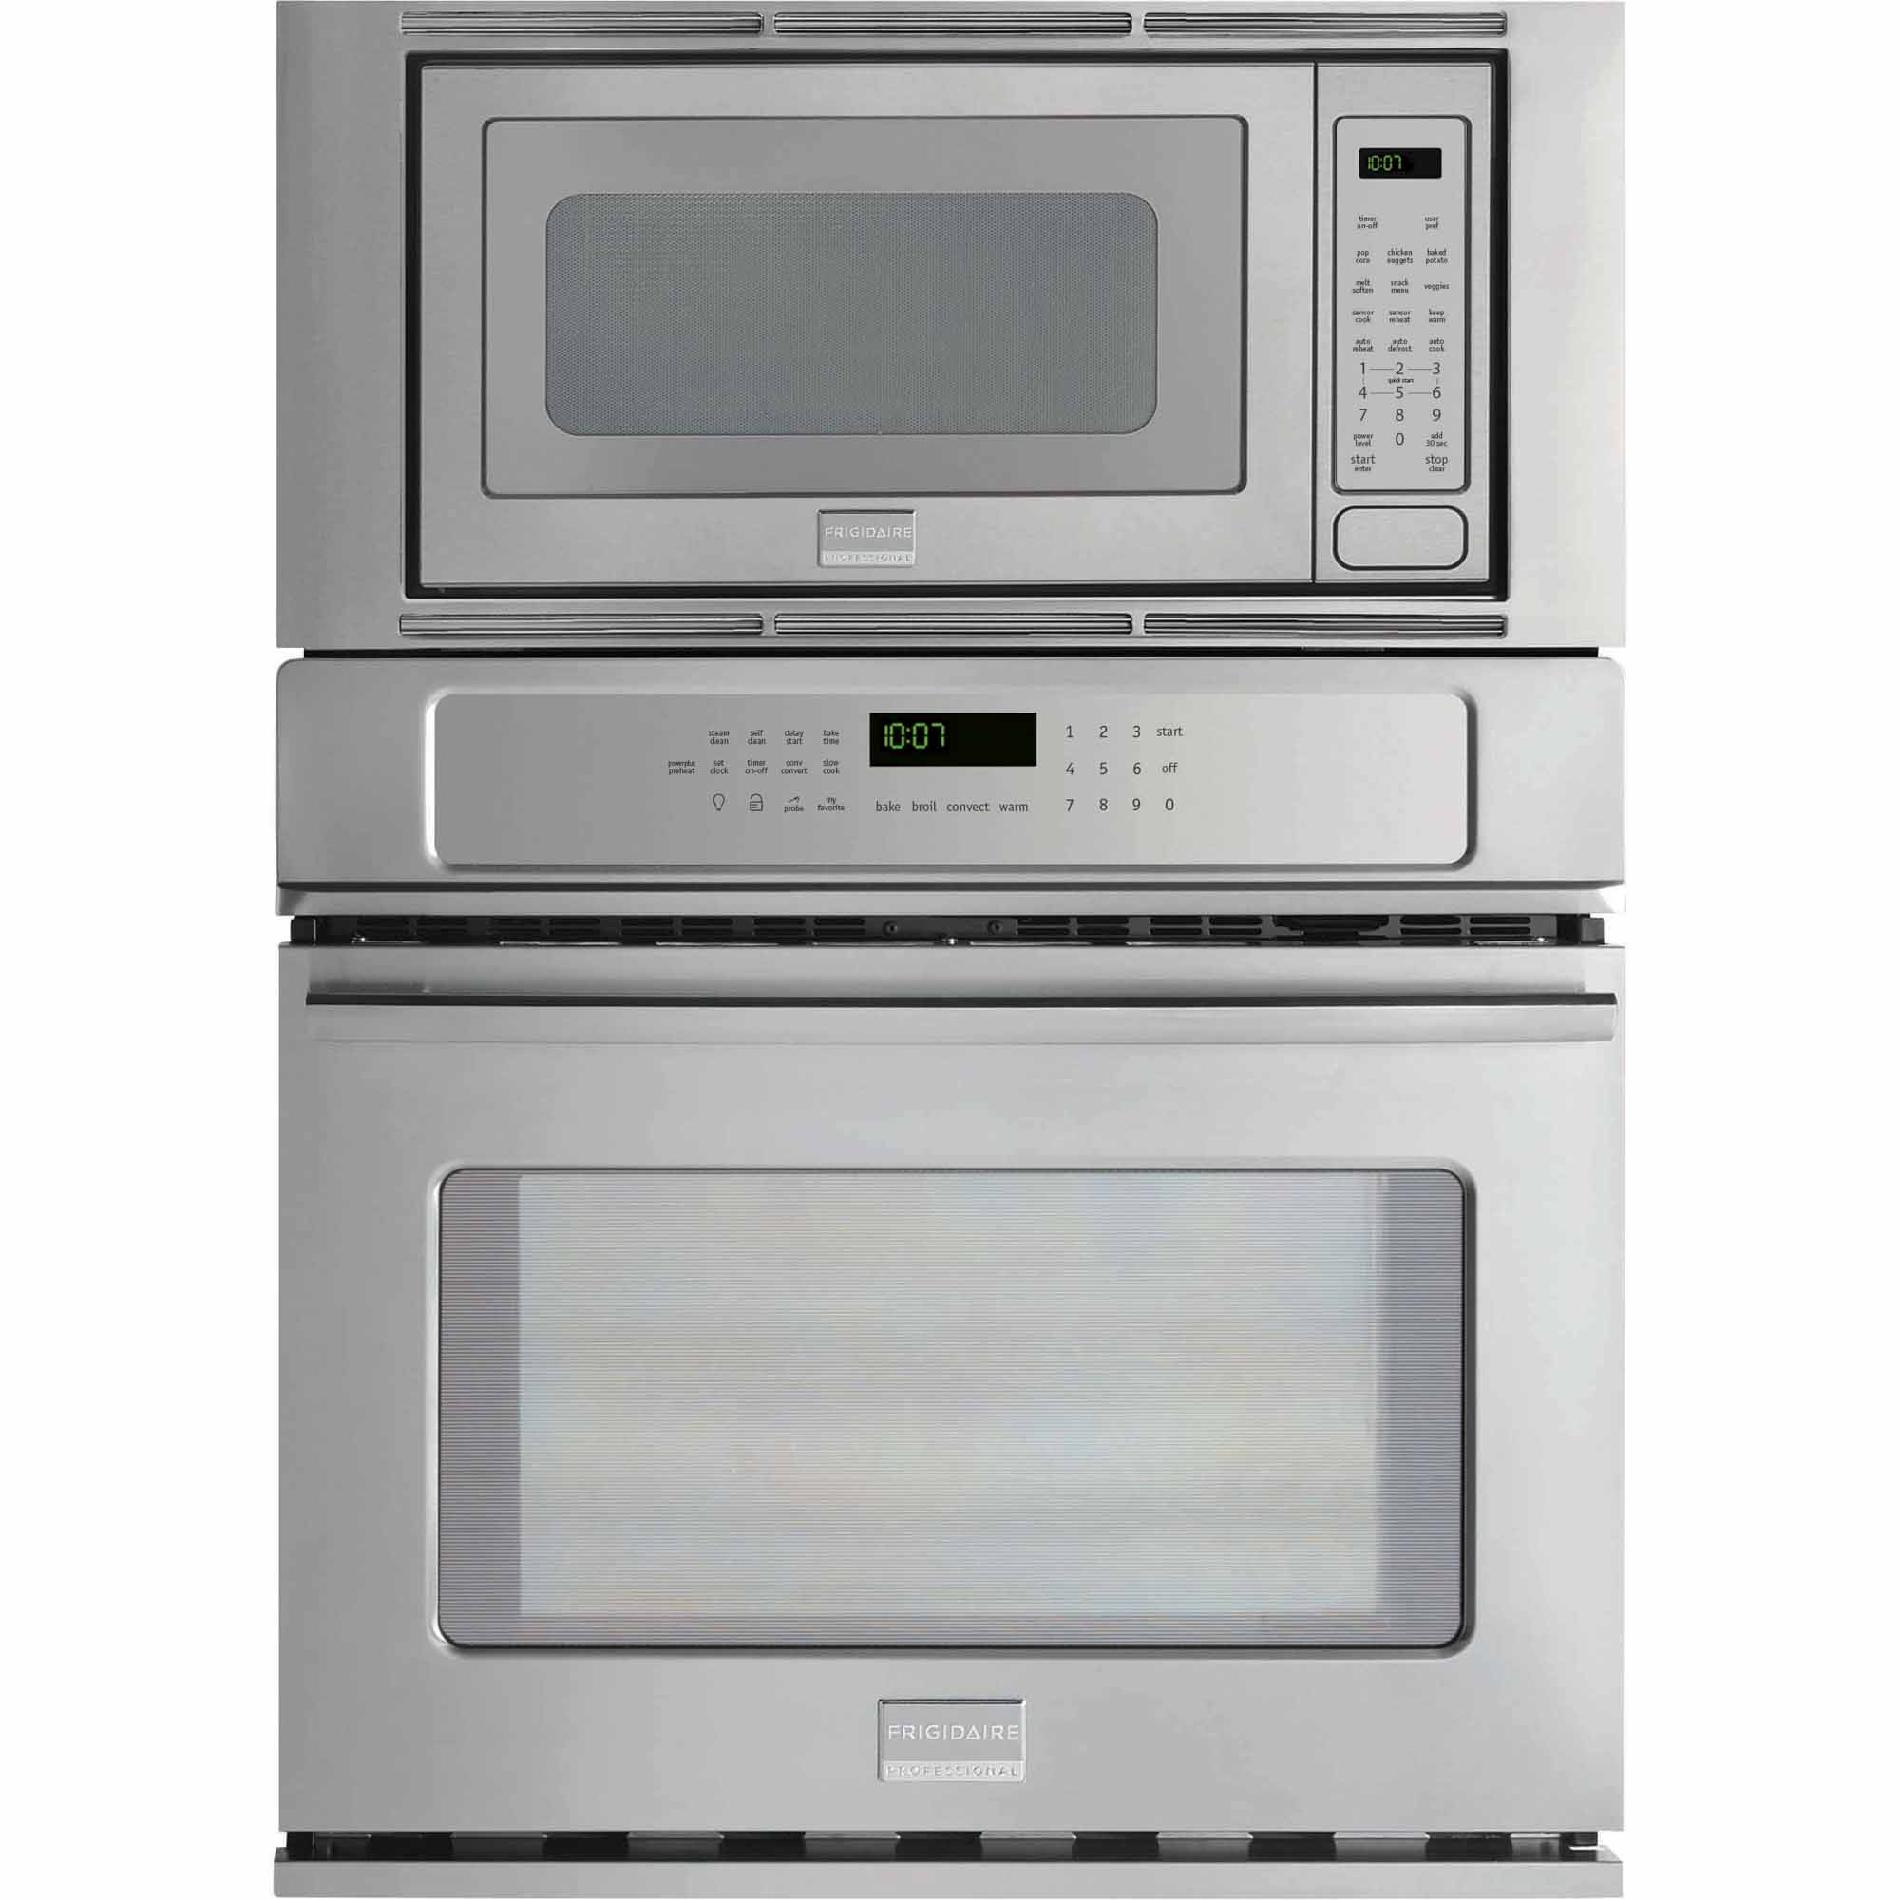 Frigidaire FPMC2785PF Professional 3.8 cu. ft. Electric Wall Oven